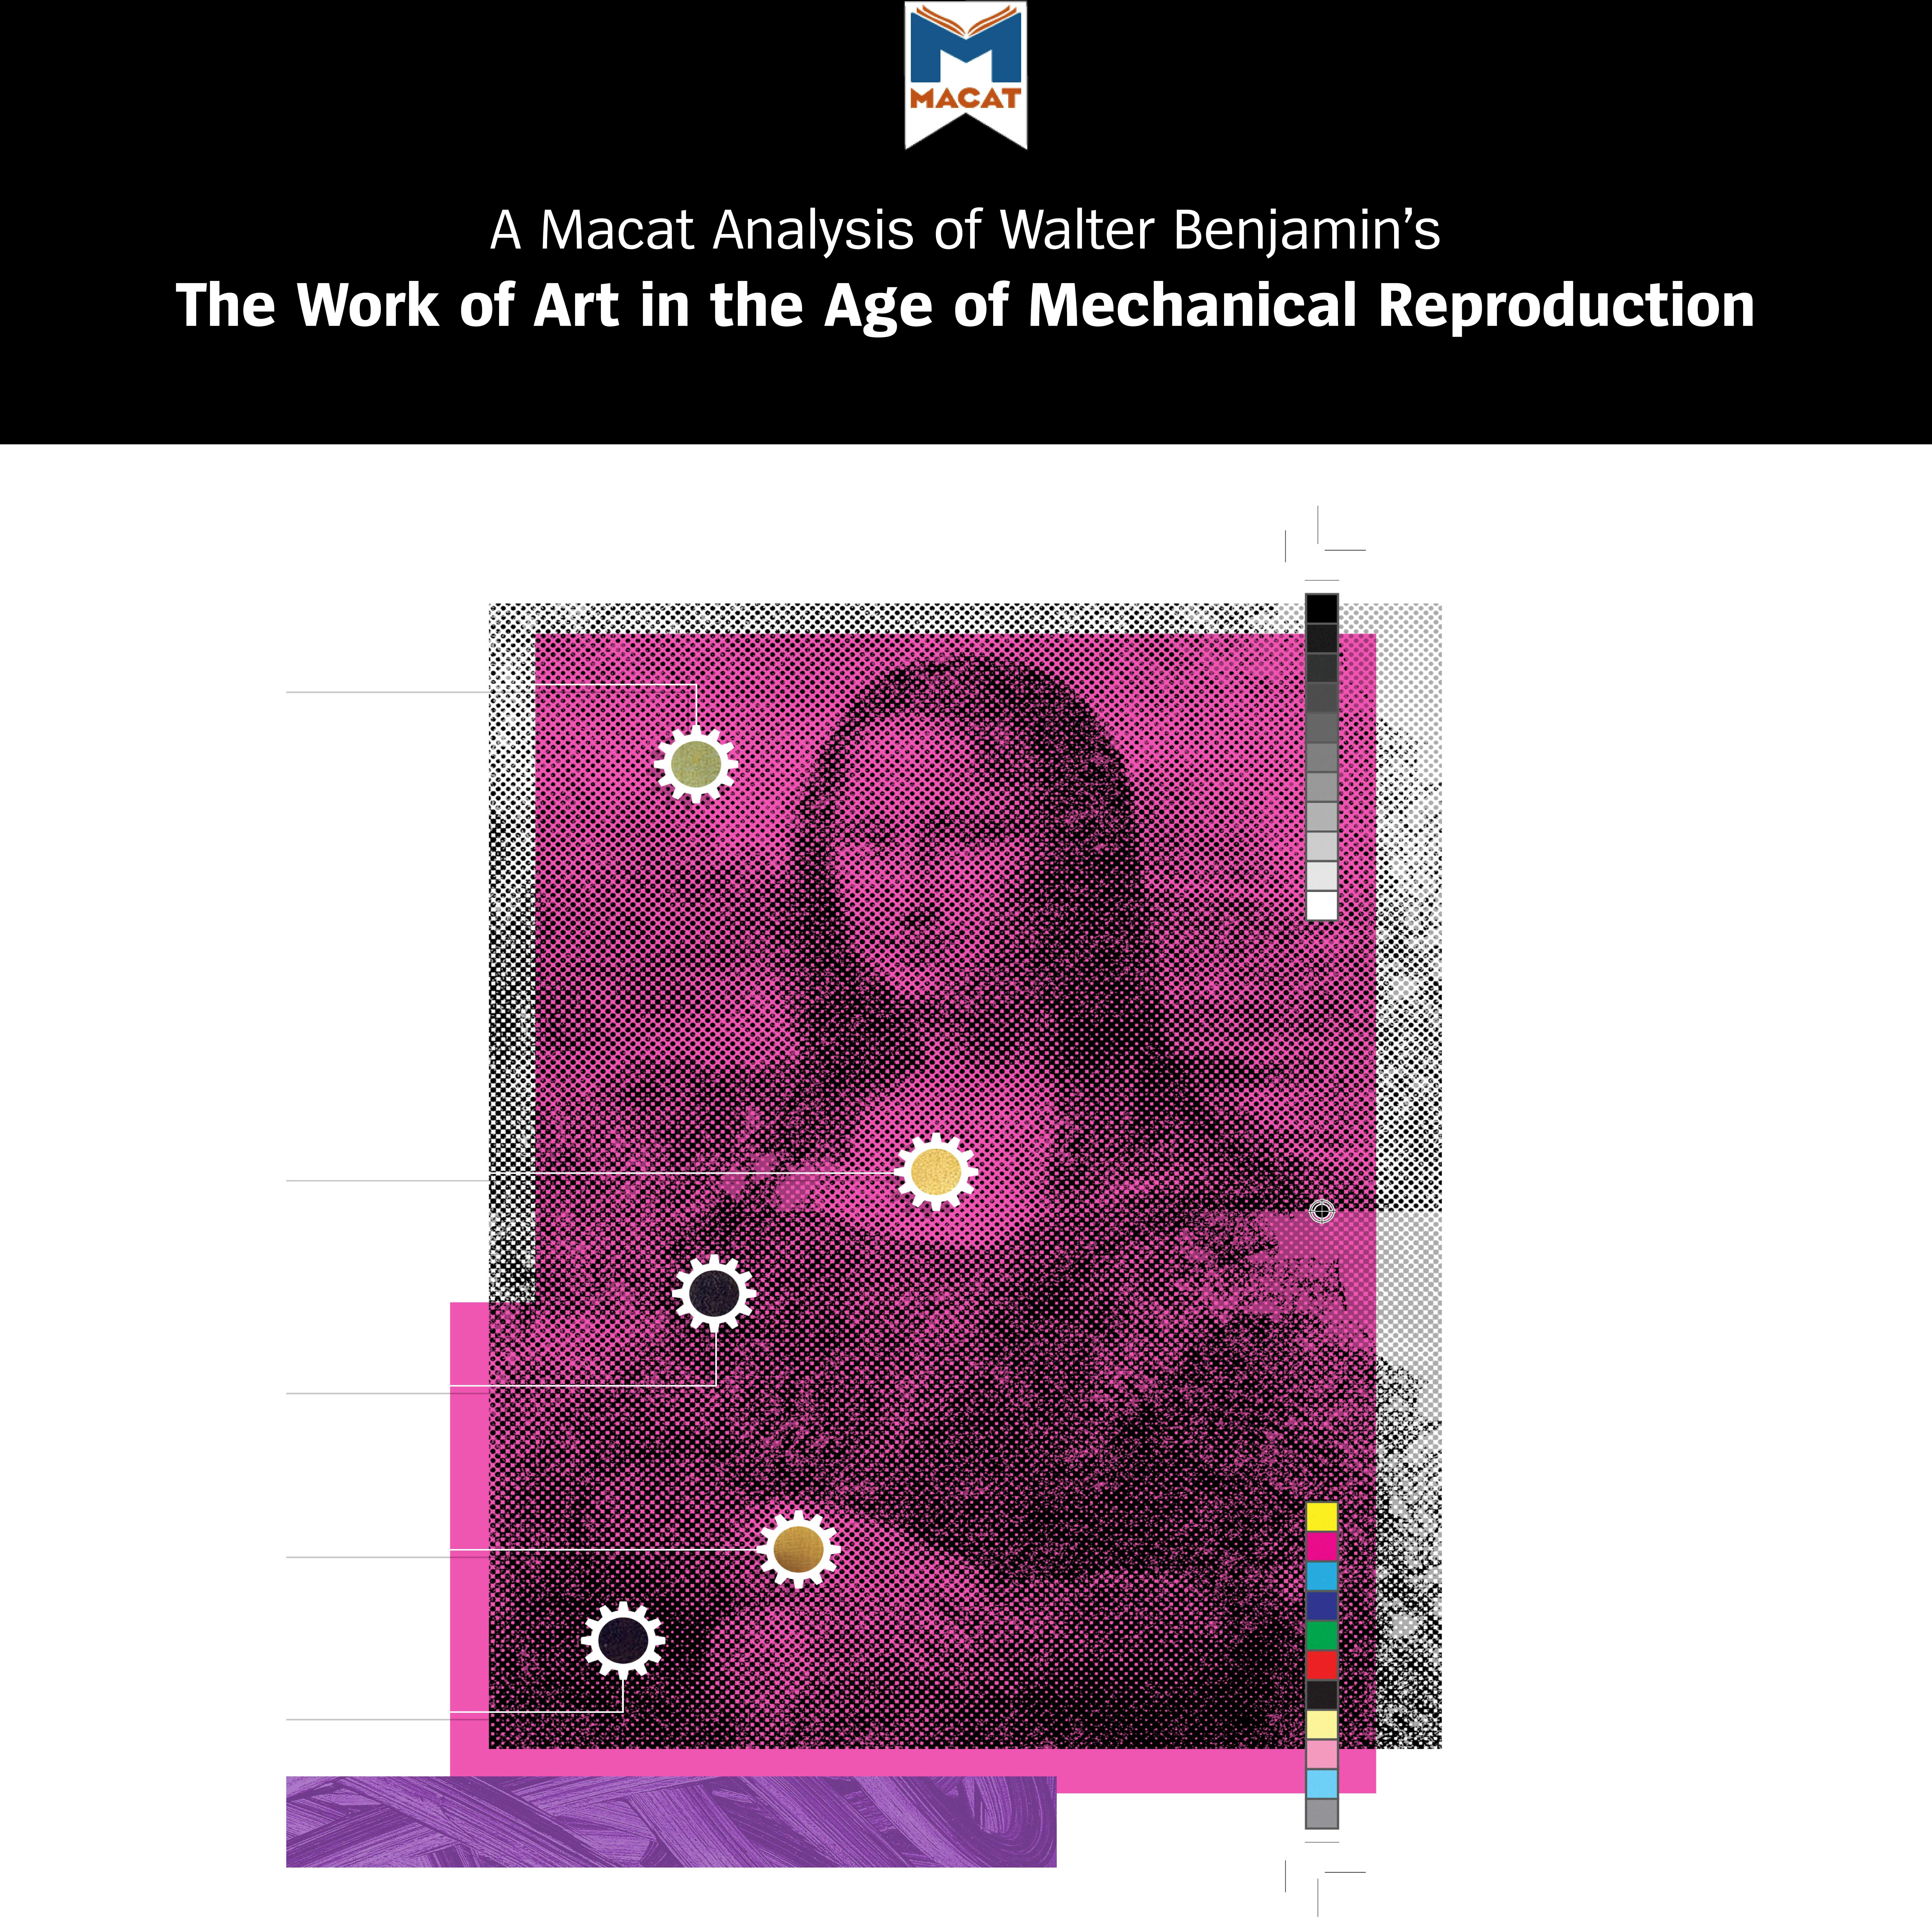 Walter Benjamin's "The Work of Art in the Age of Mechanical Reproduction": A Macat Analysis - undefined